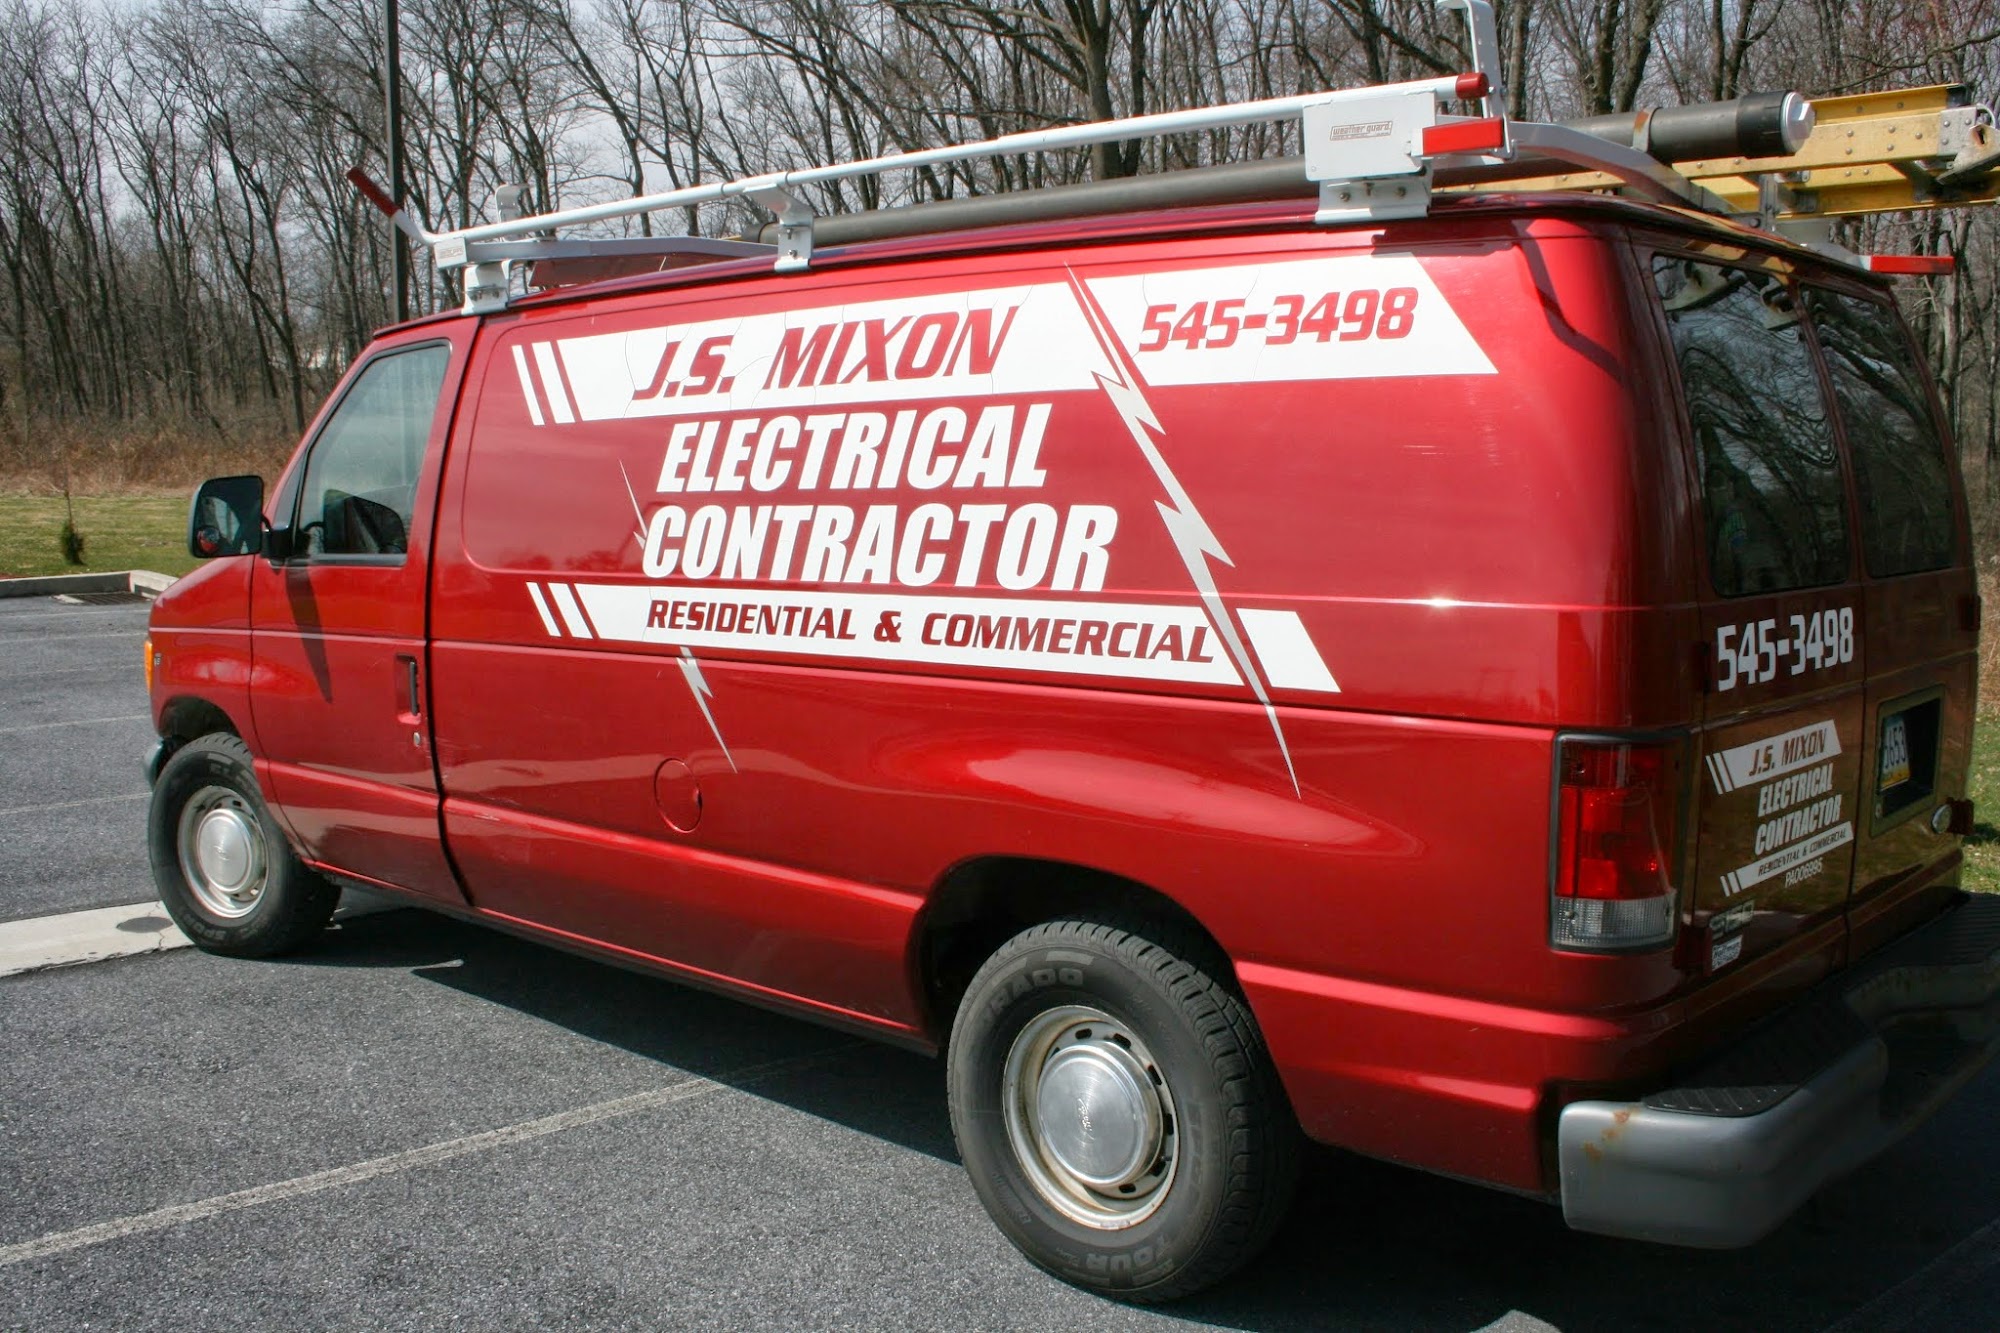 J S Mixon Electrical Contractor